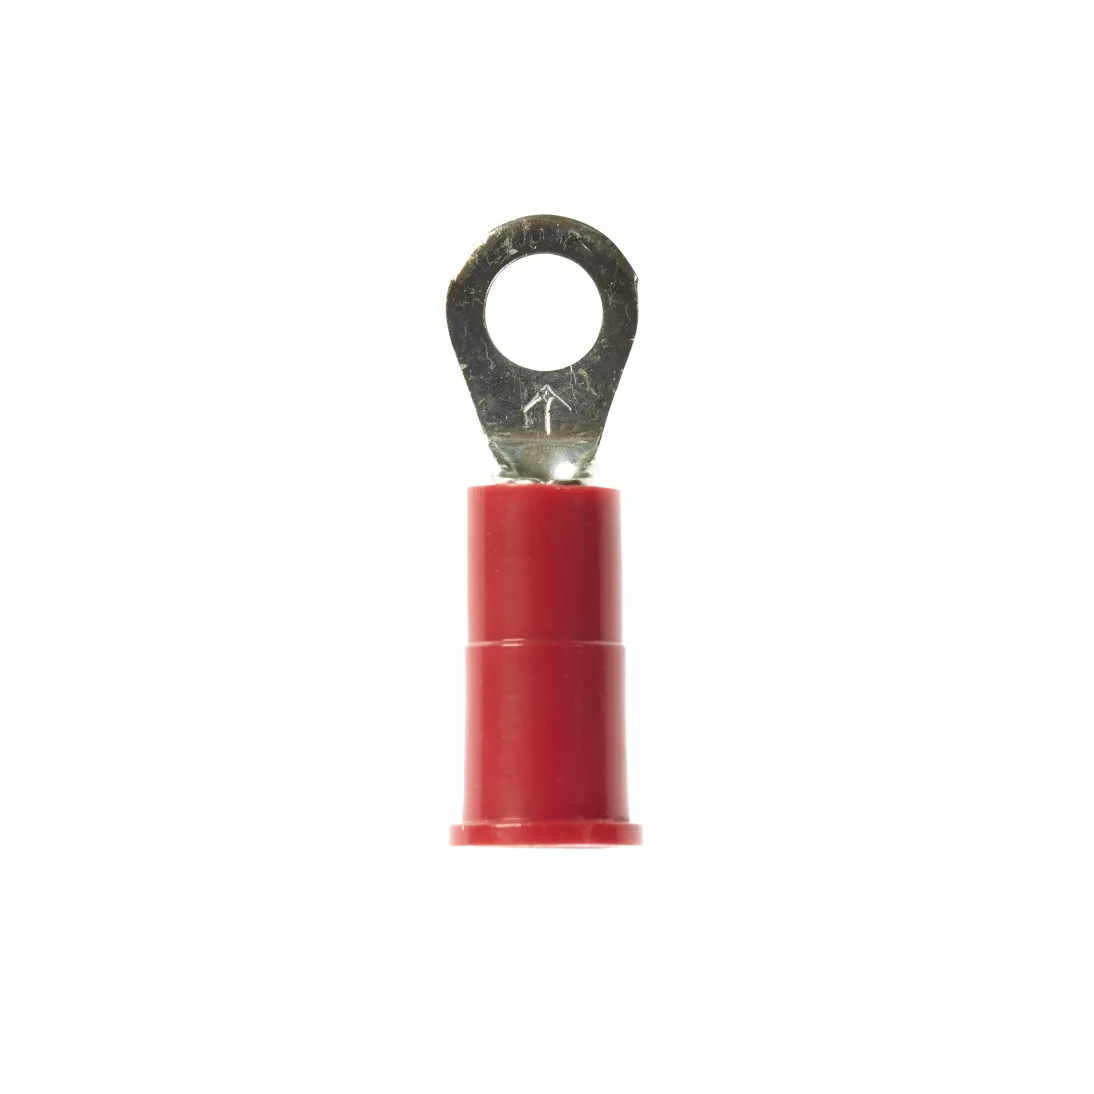 3M™ Scotchlok™ Ring Vinyl Insulated, 100/bottle, MVU18-6R/SX,
standard-style ring tongue fits around the stud, 500/Case